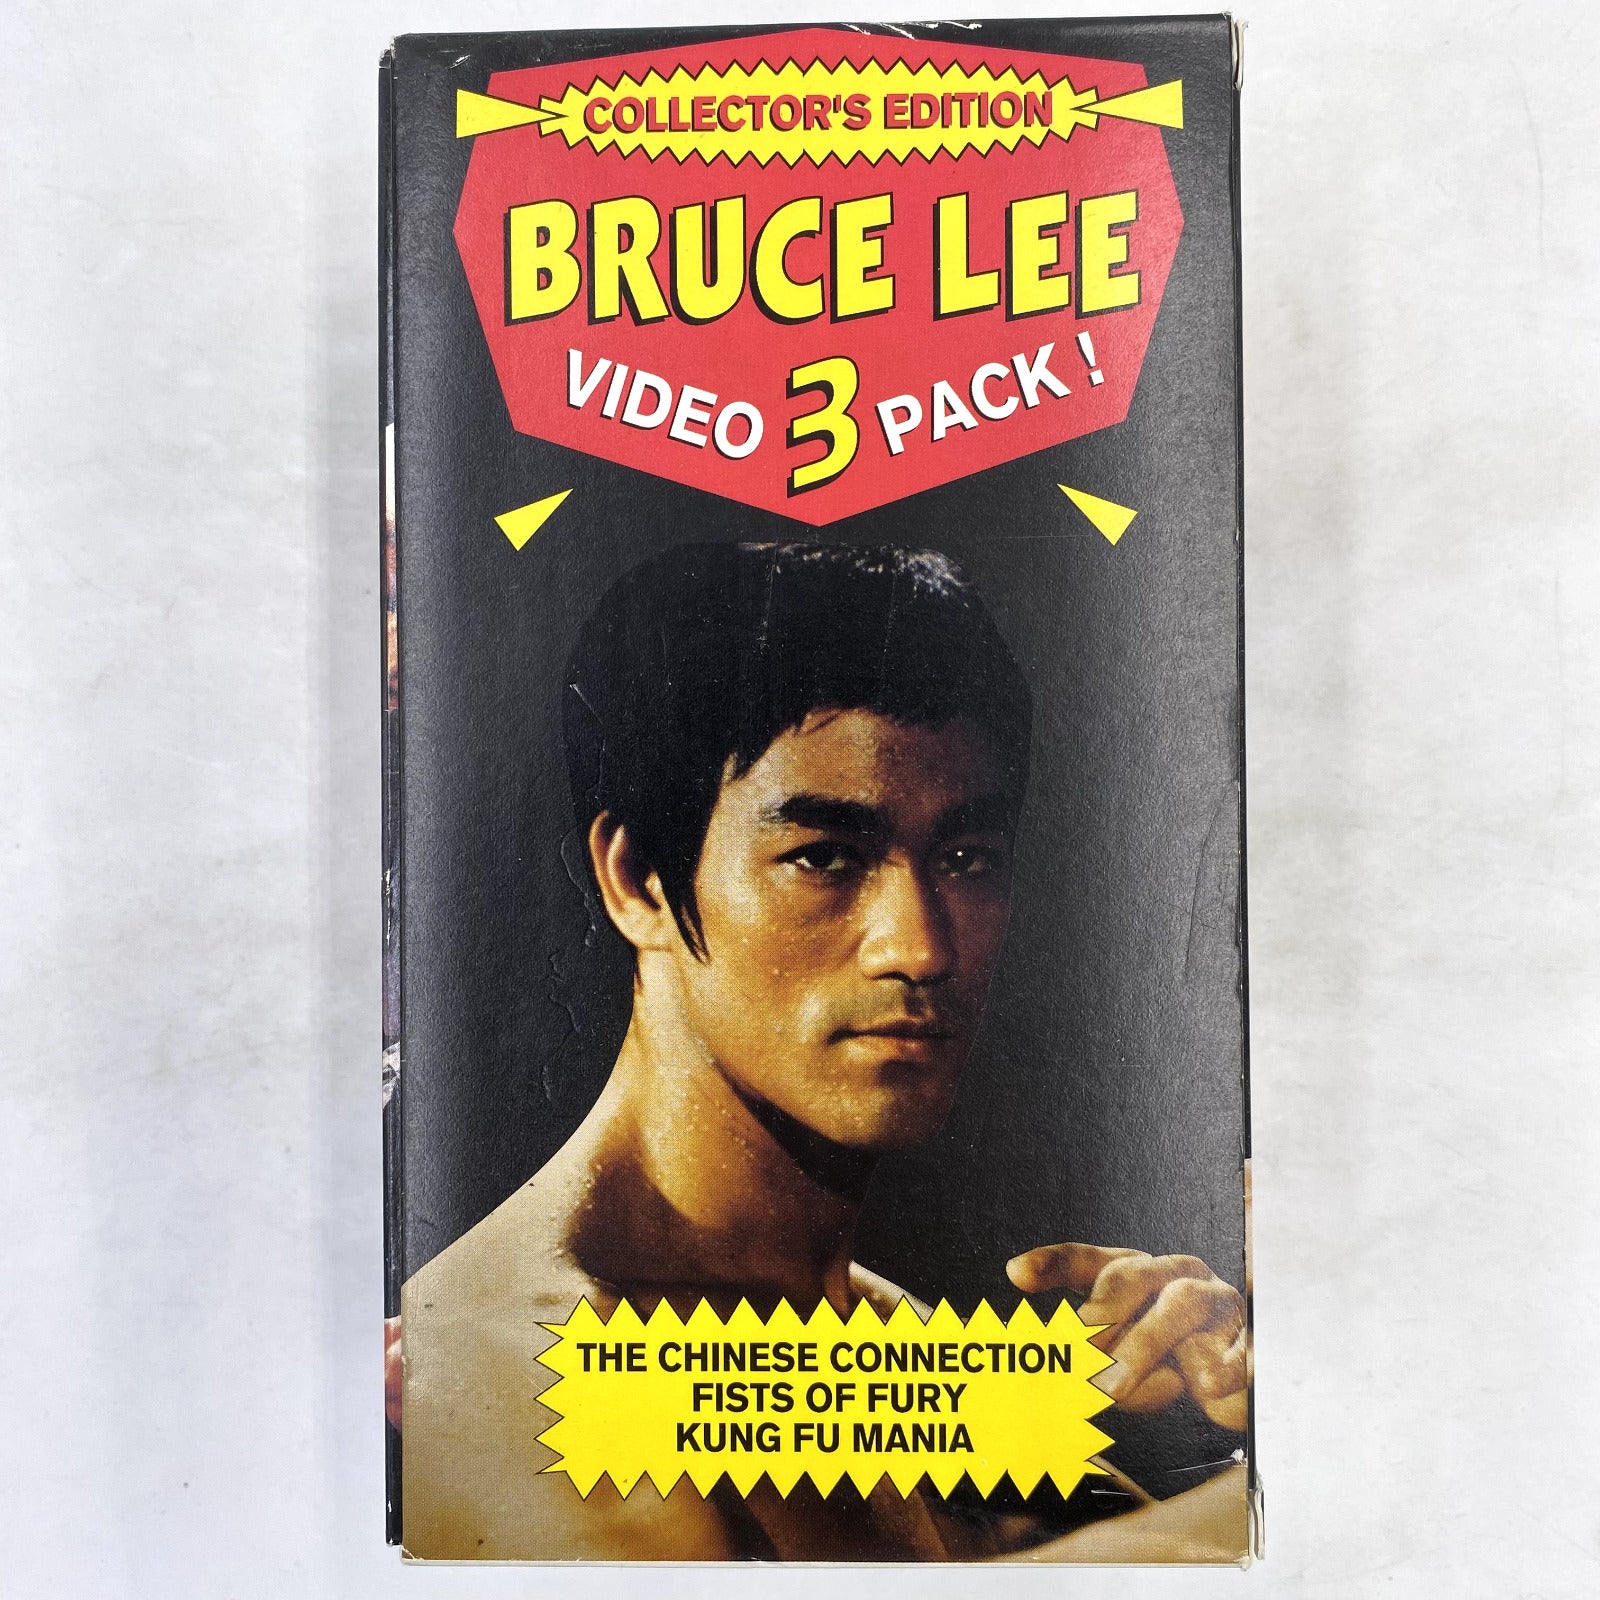 Bruce Lee Video 3 Pack VHS - Chinese Connection - Fists of Fury - Kung Fu Mania